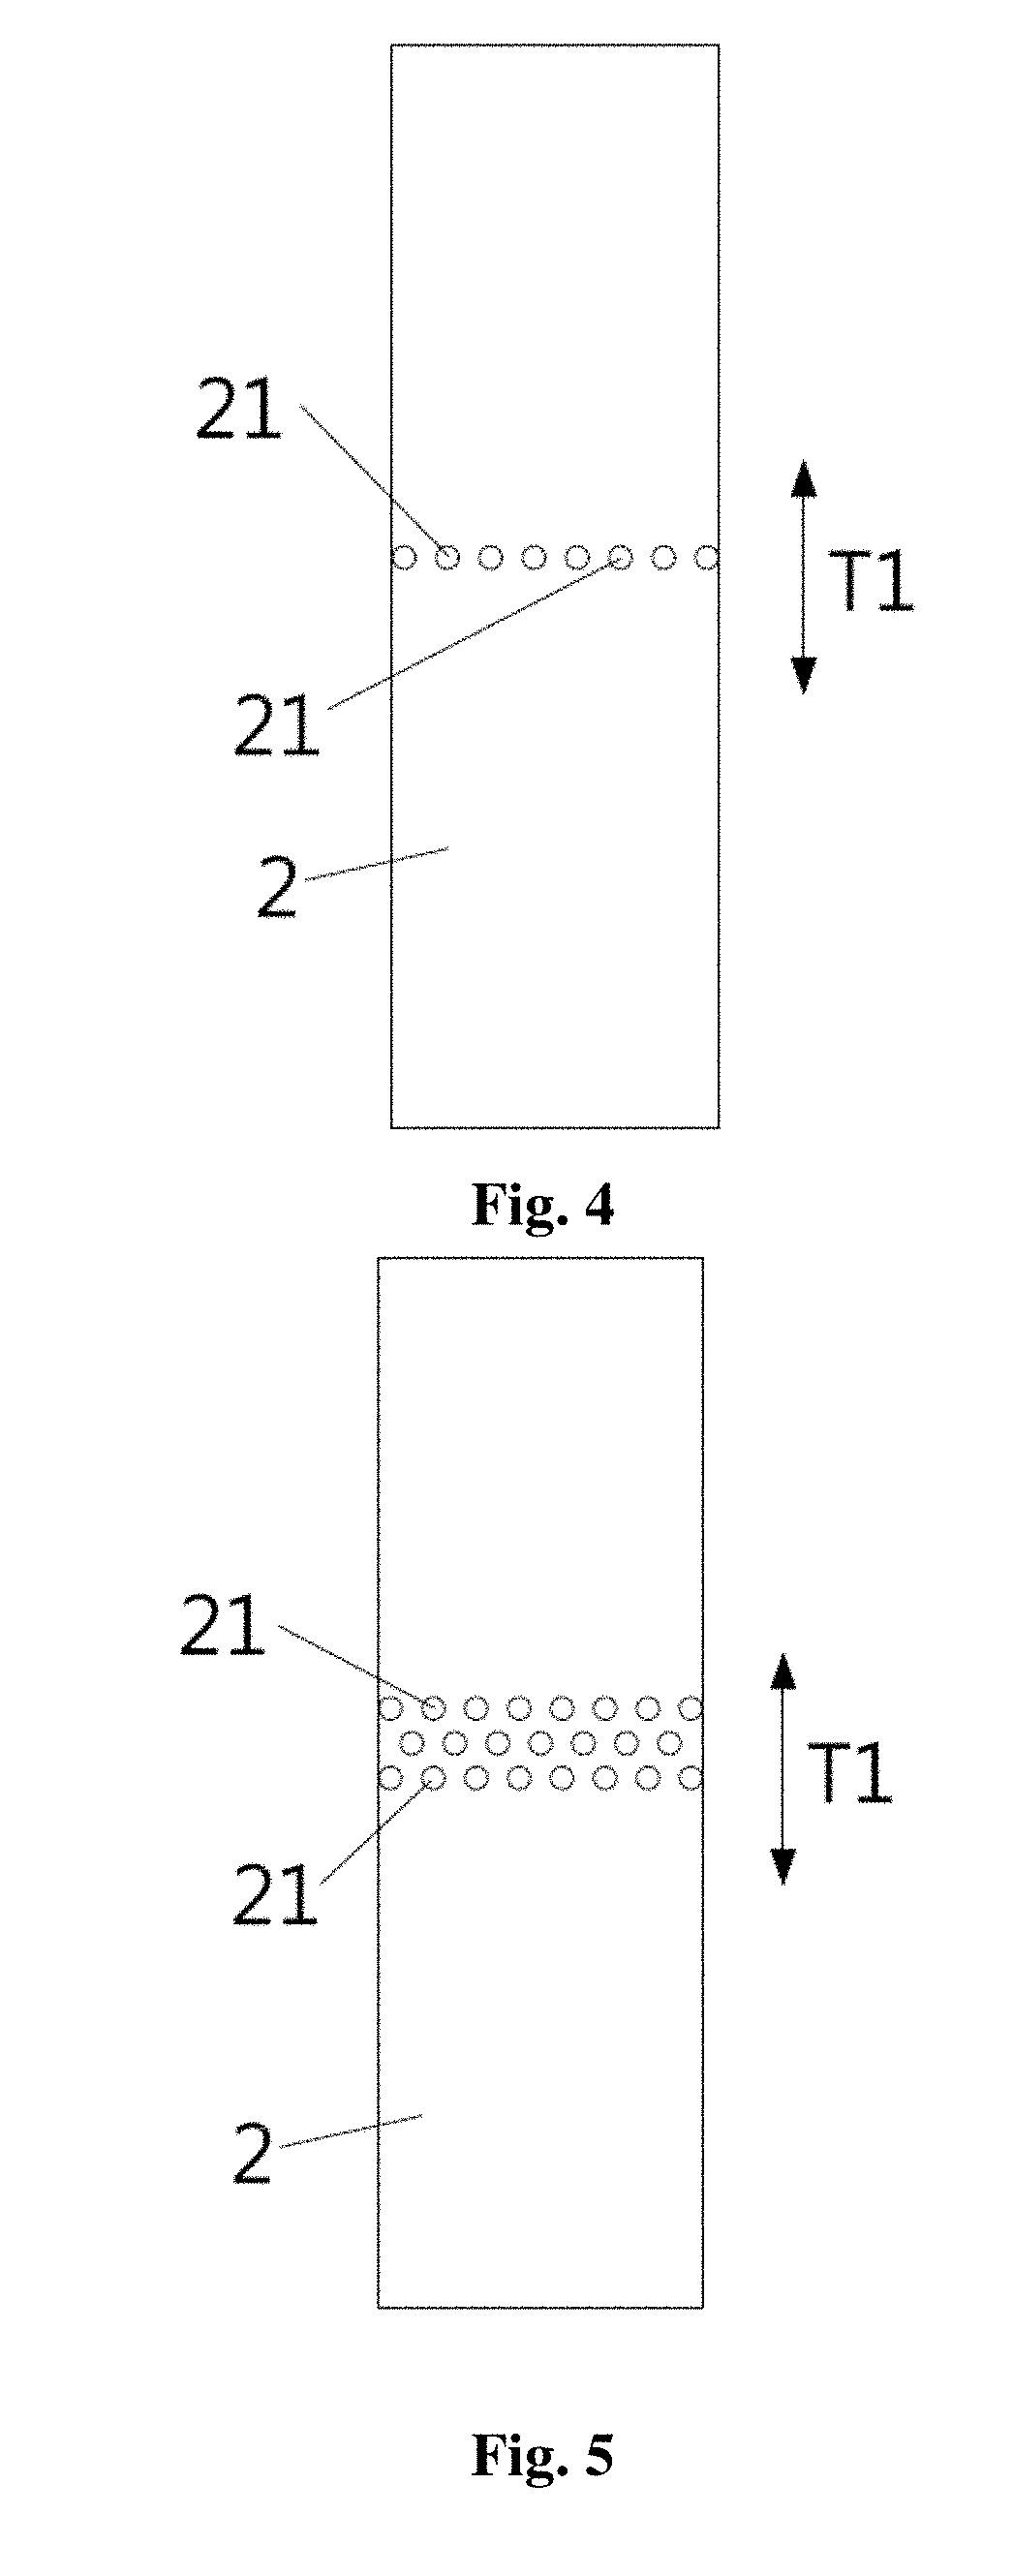 Method and apparatus of generating substantially monodisperse droplets